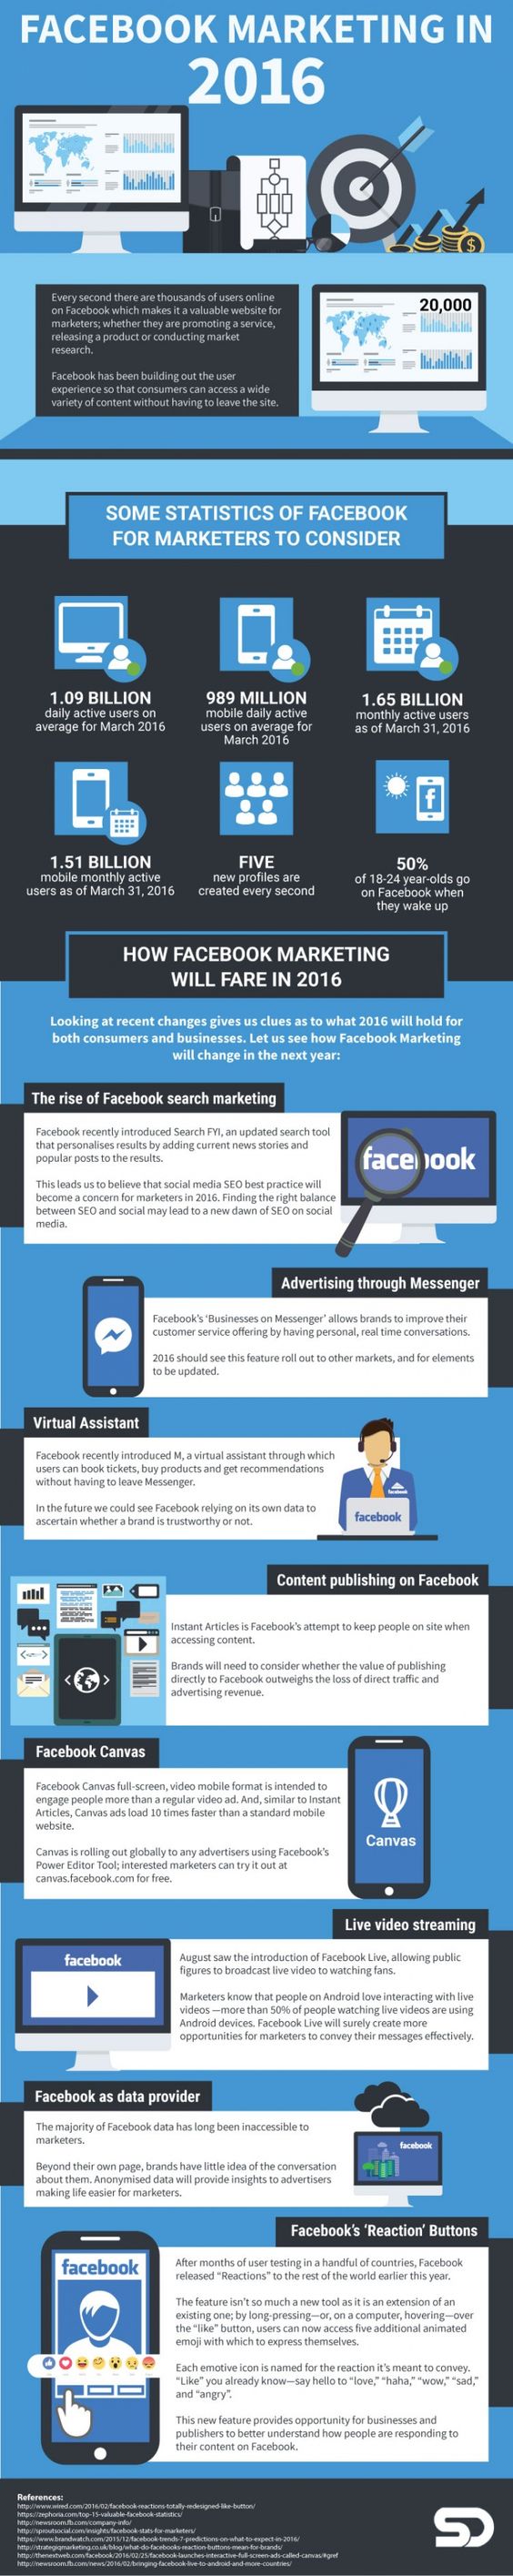 What's New In 2016 For Facebook Marketing